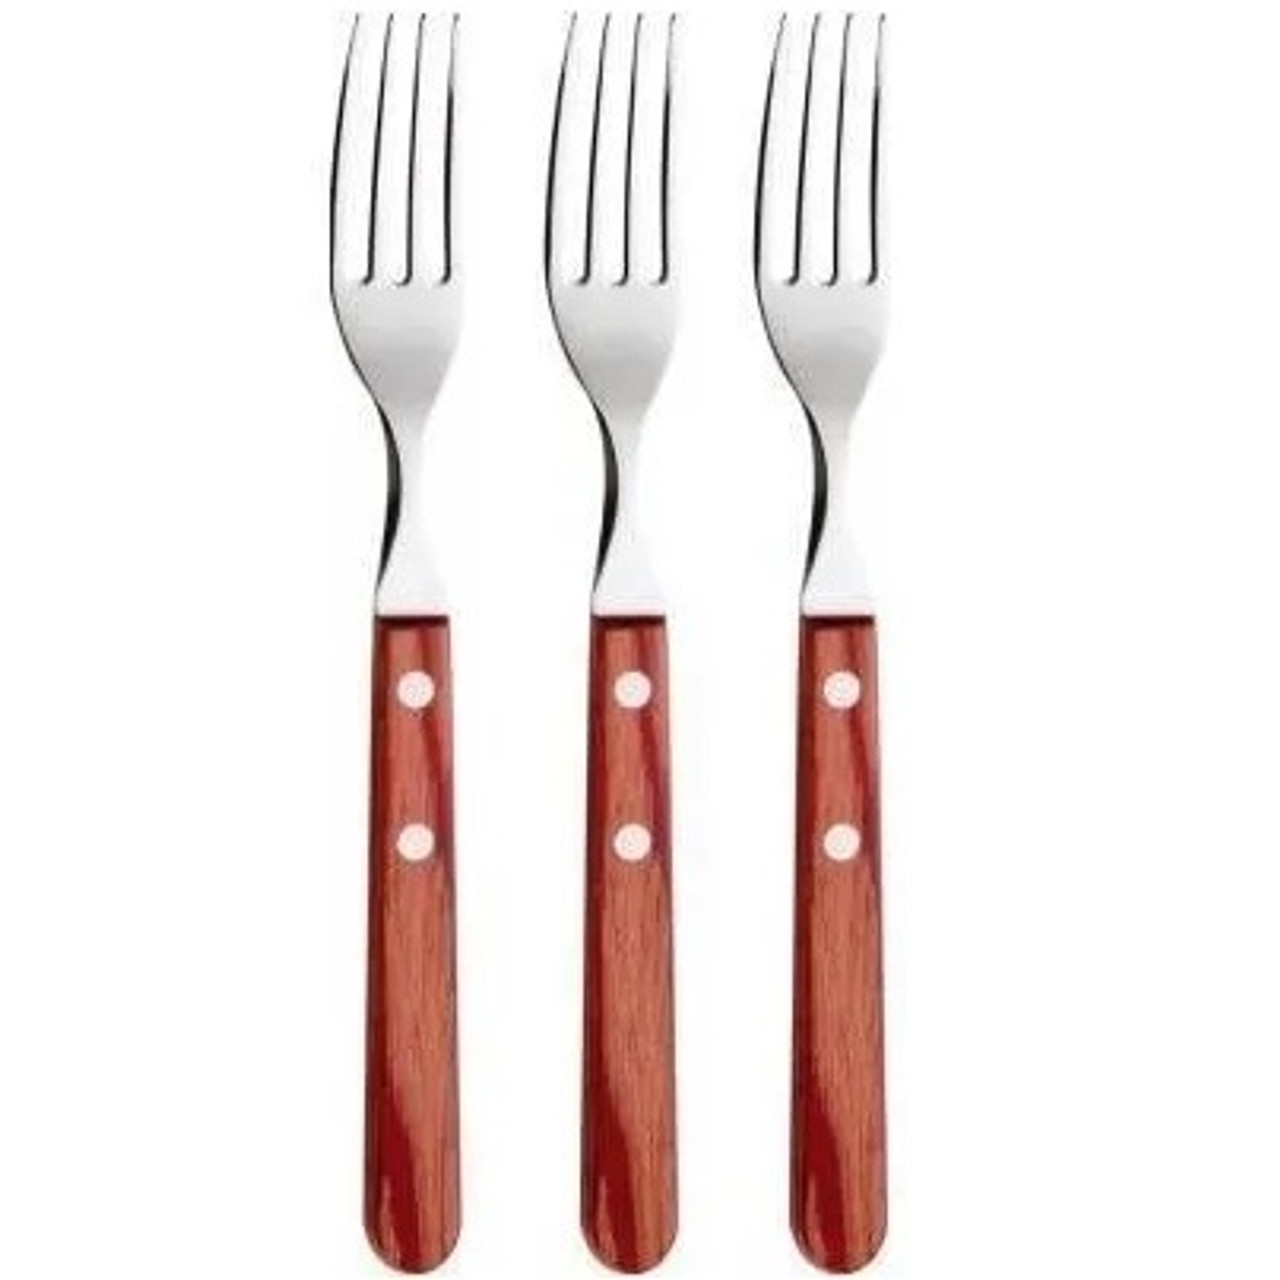 https://cdn11.bigcommerce.com/s-3stx4pub31/images/stencil/1280x1280/products/5045/13438/tramontina-polywood-tenedores-stainless-steel-forks-2__58763.1655489727.jpg?c=2?imbypass=on